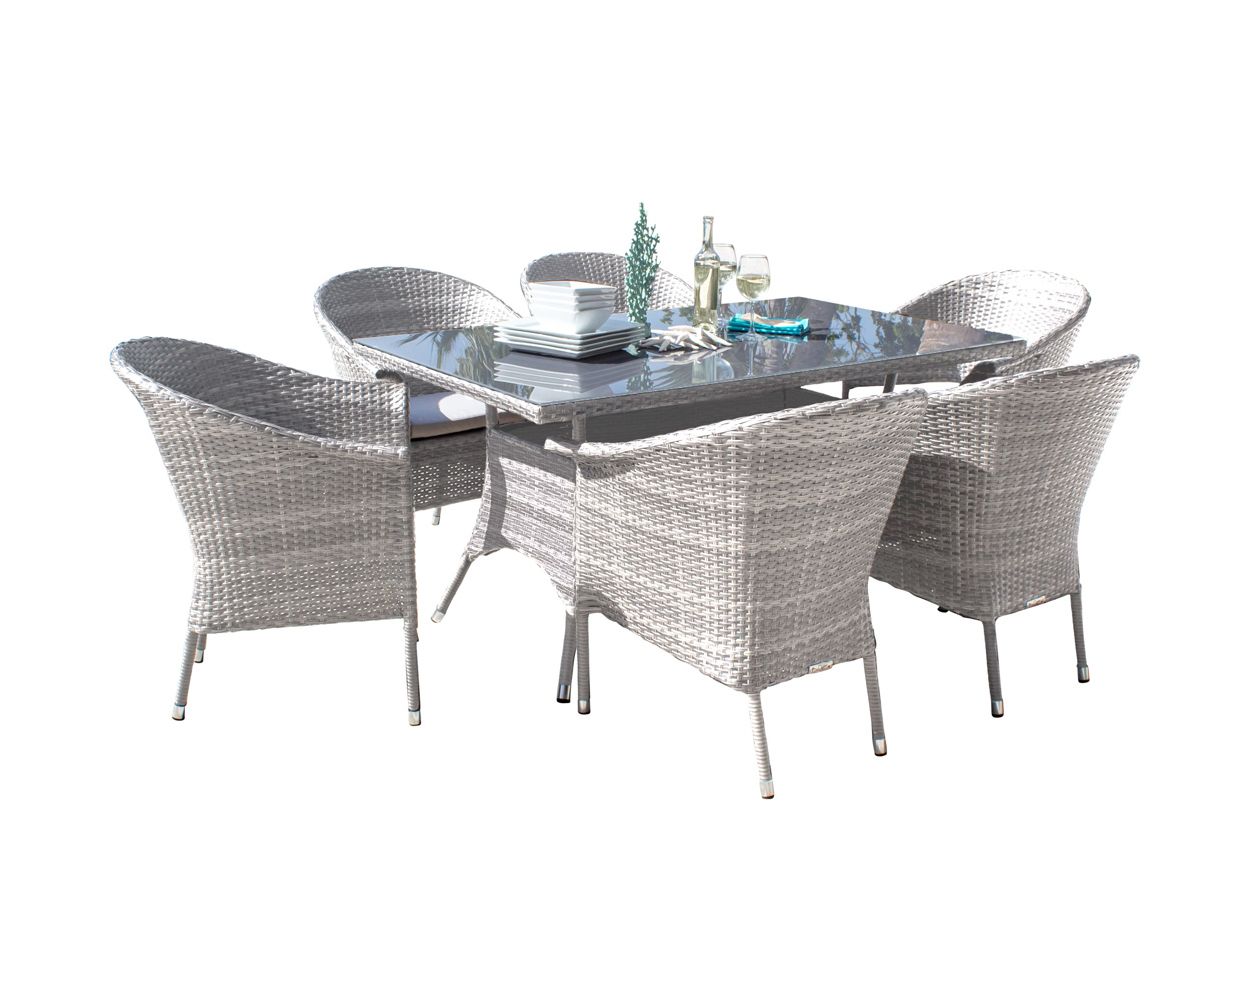 Hospitality Rattan Athens 7-Piece Woven Armchair Dining Set with Cushions